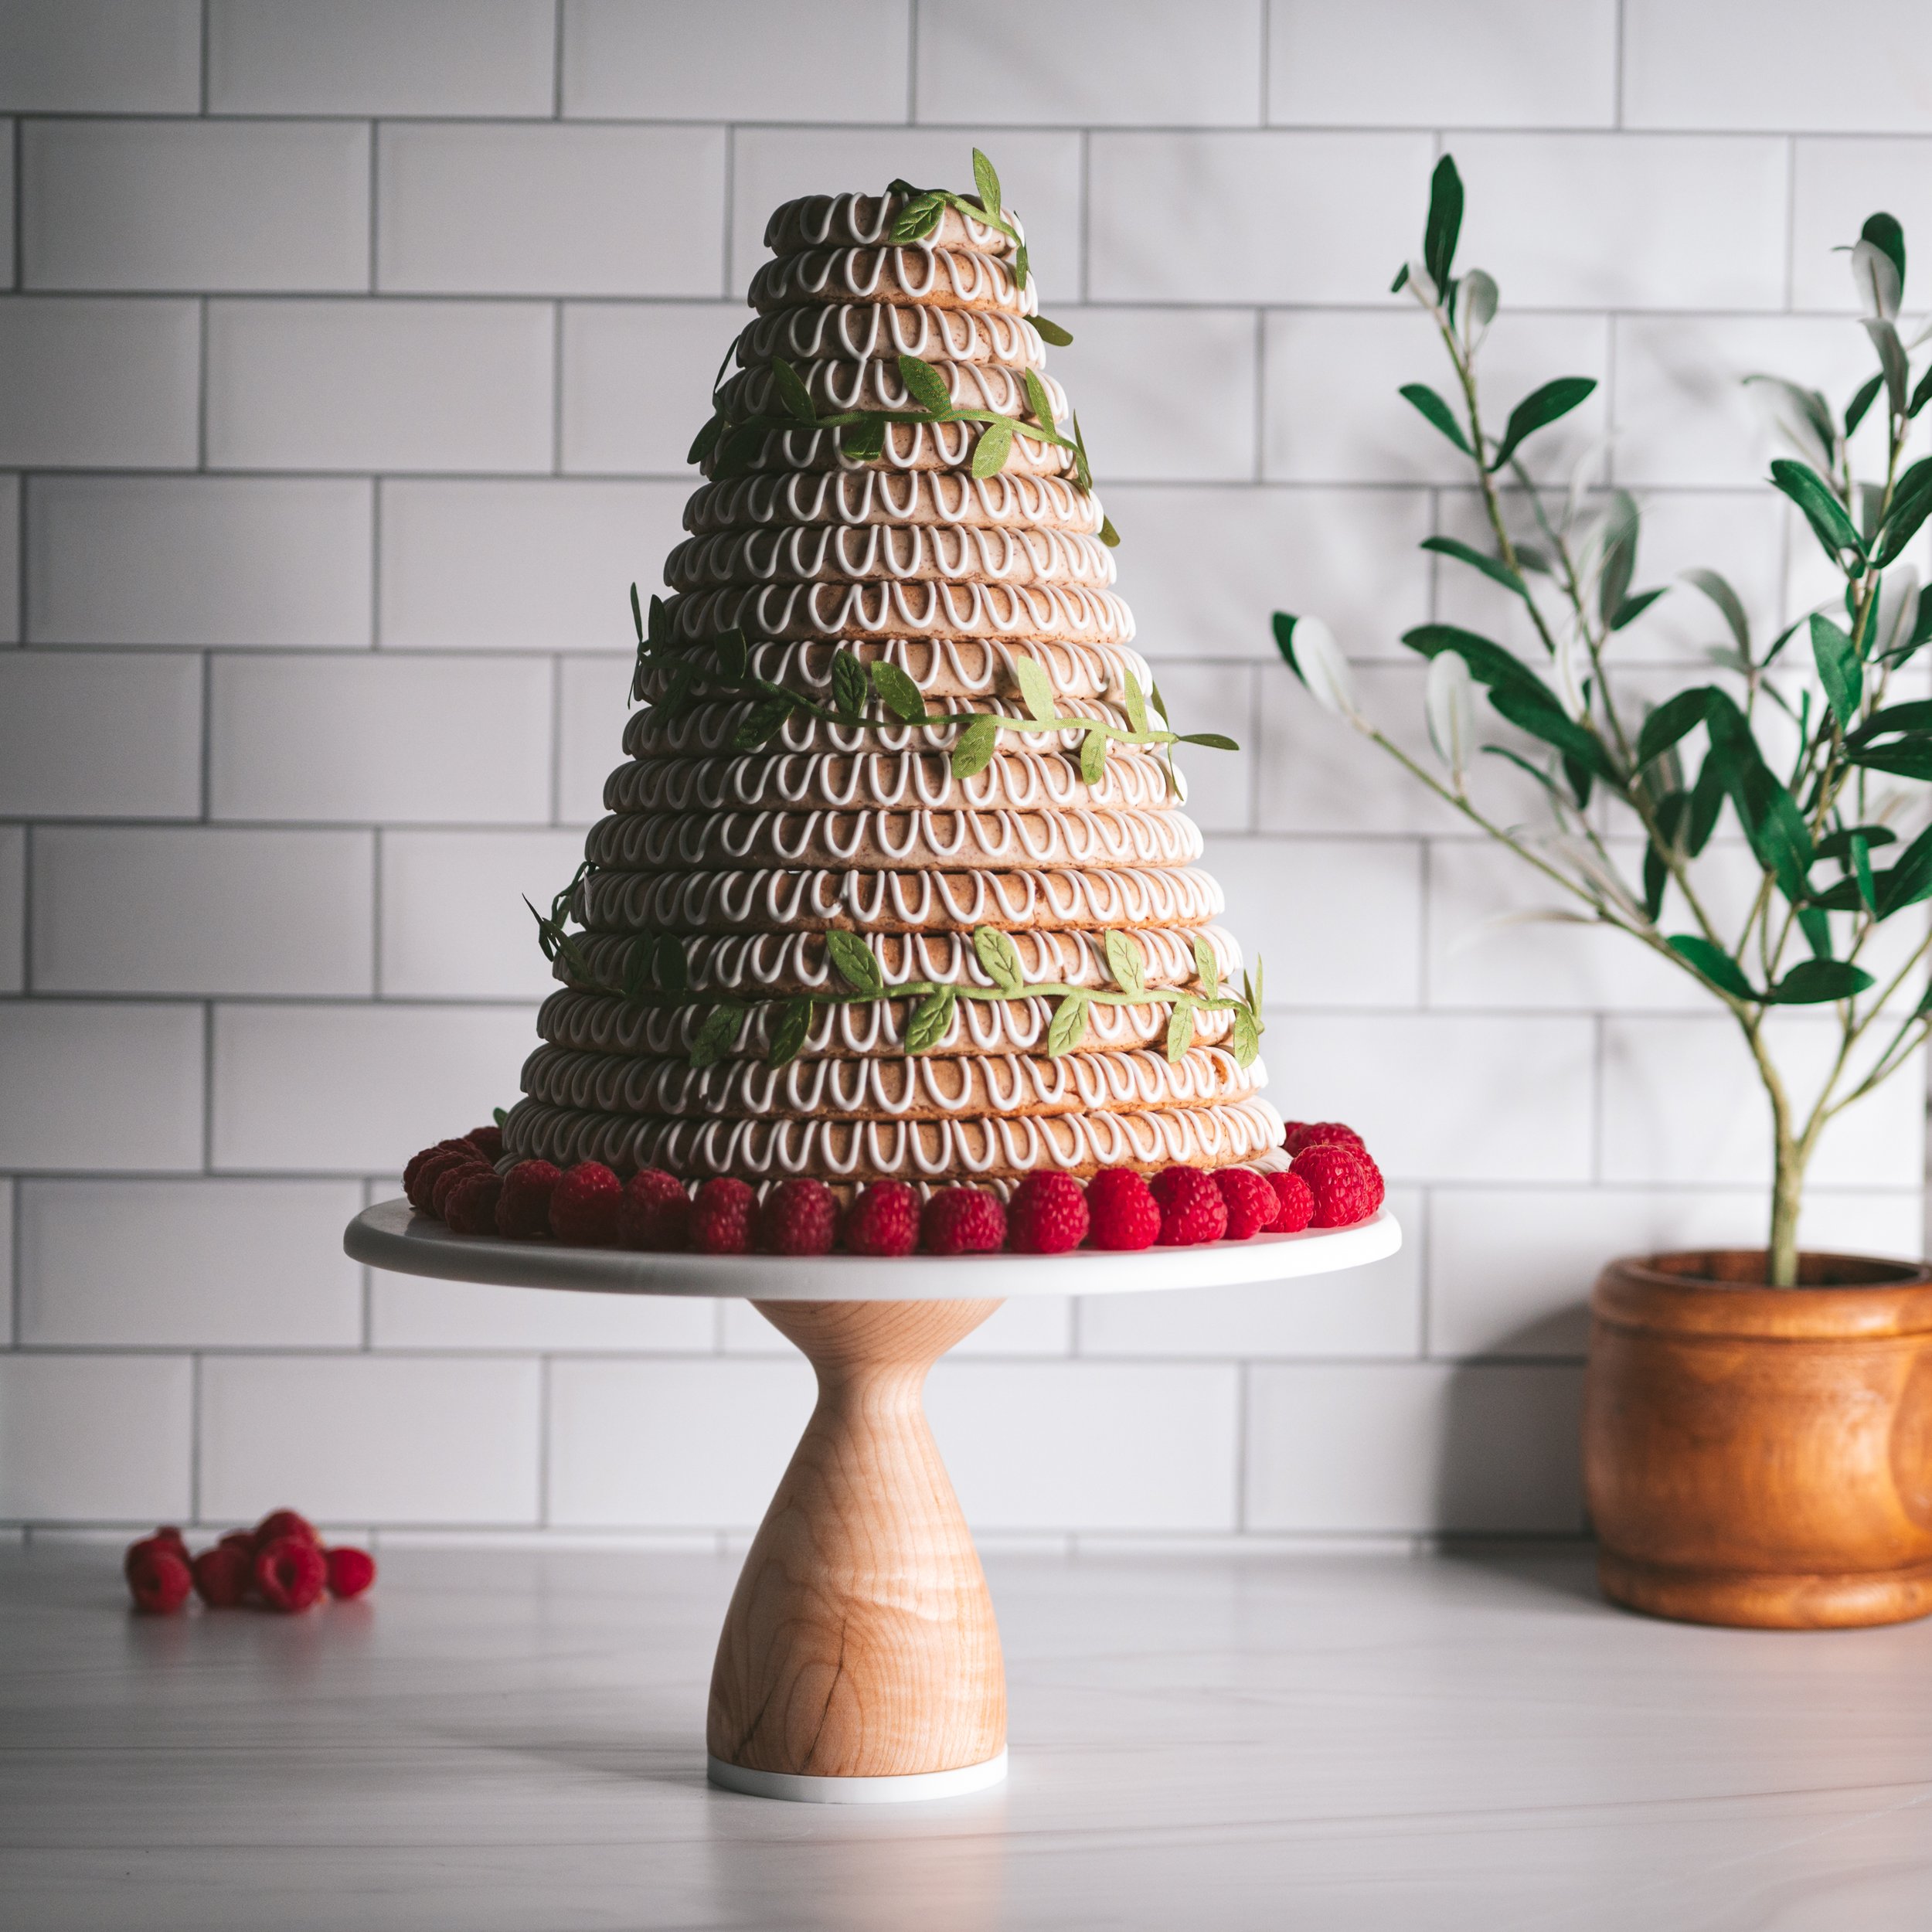 Spiced Christmas Tree Cake – Andrew in the Kitchen